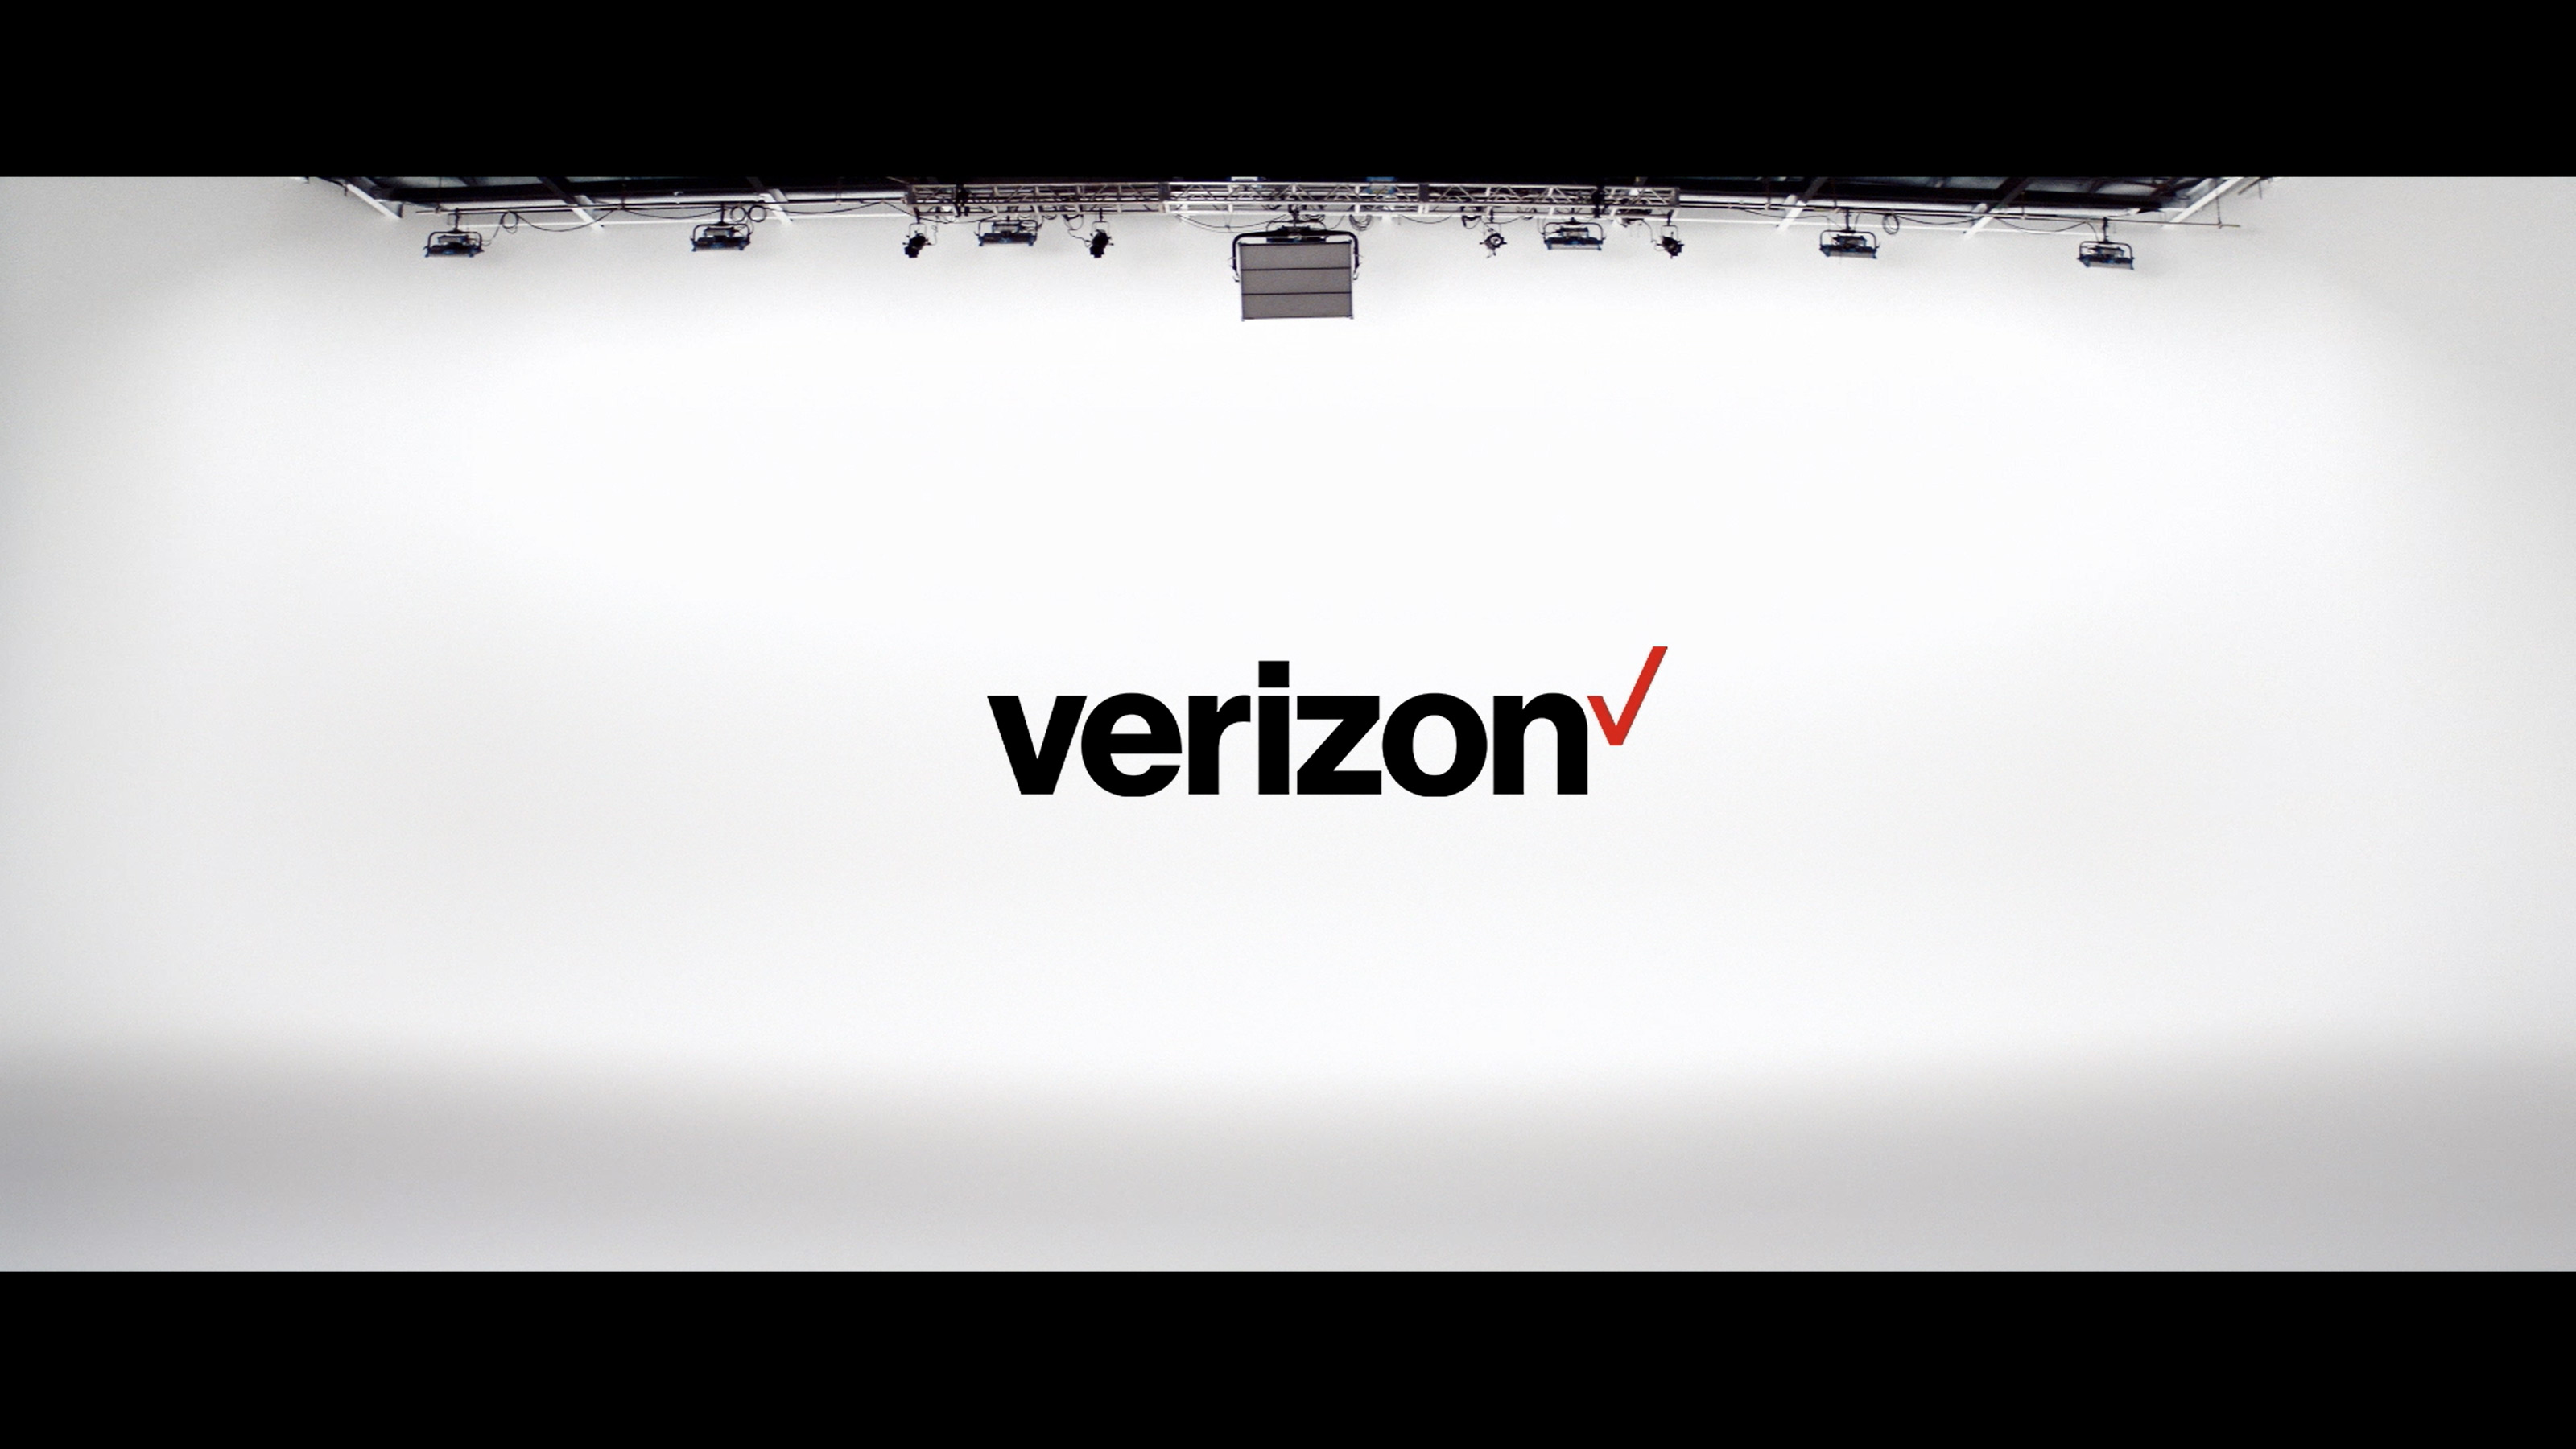 In Show | Oscars Commercial | Verizon